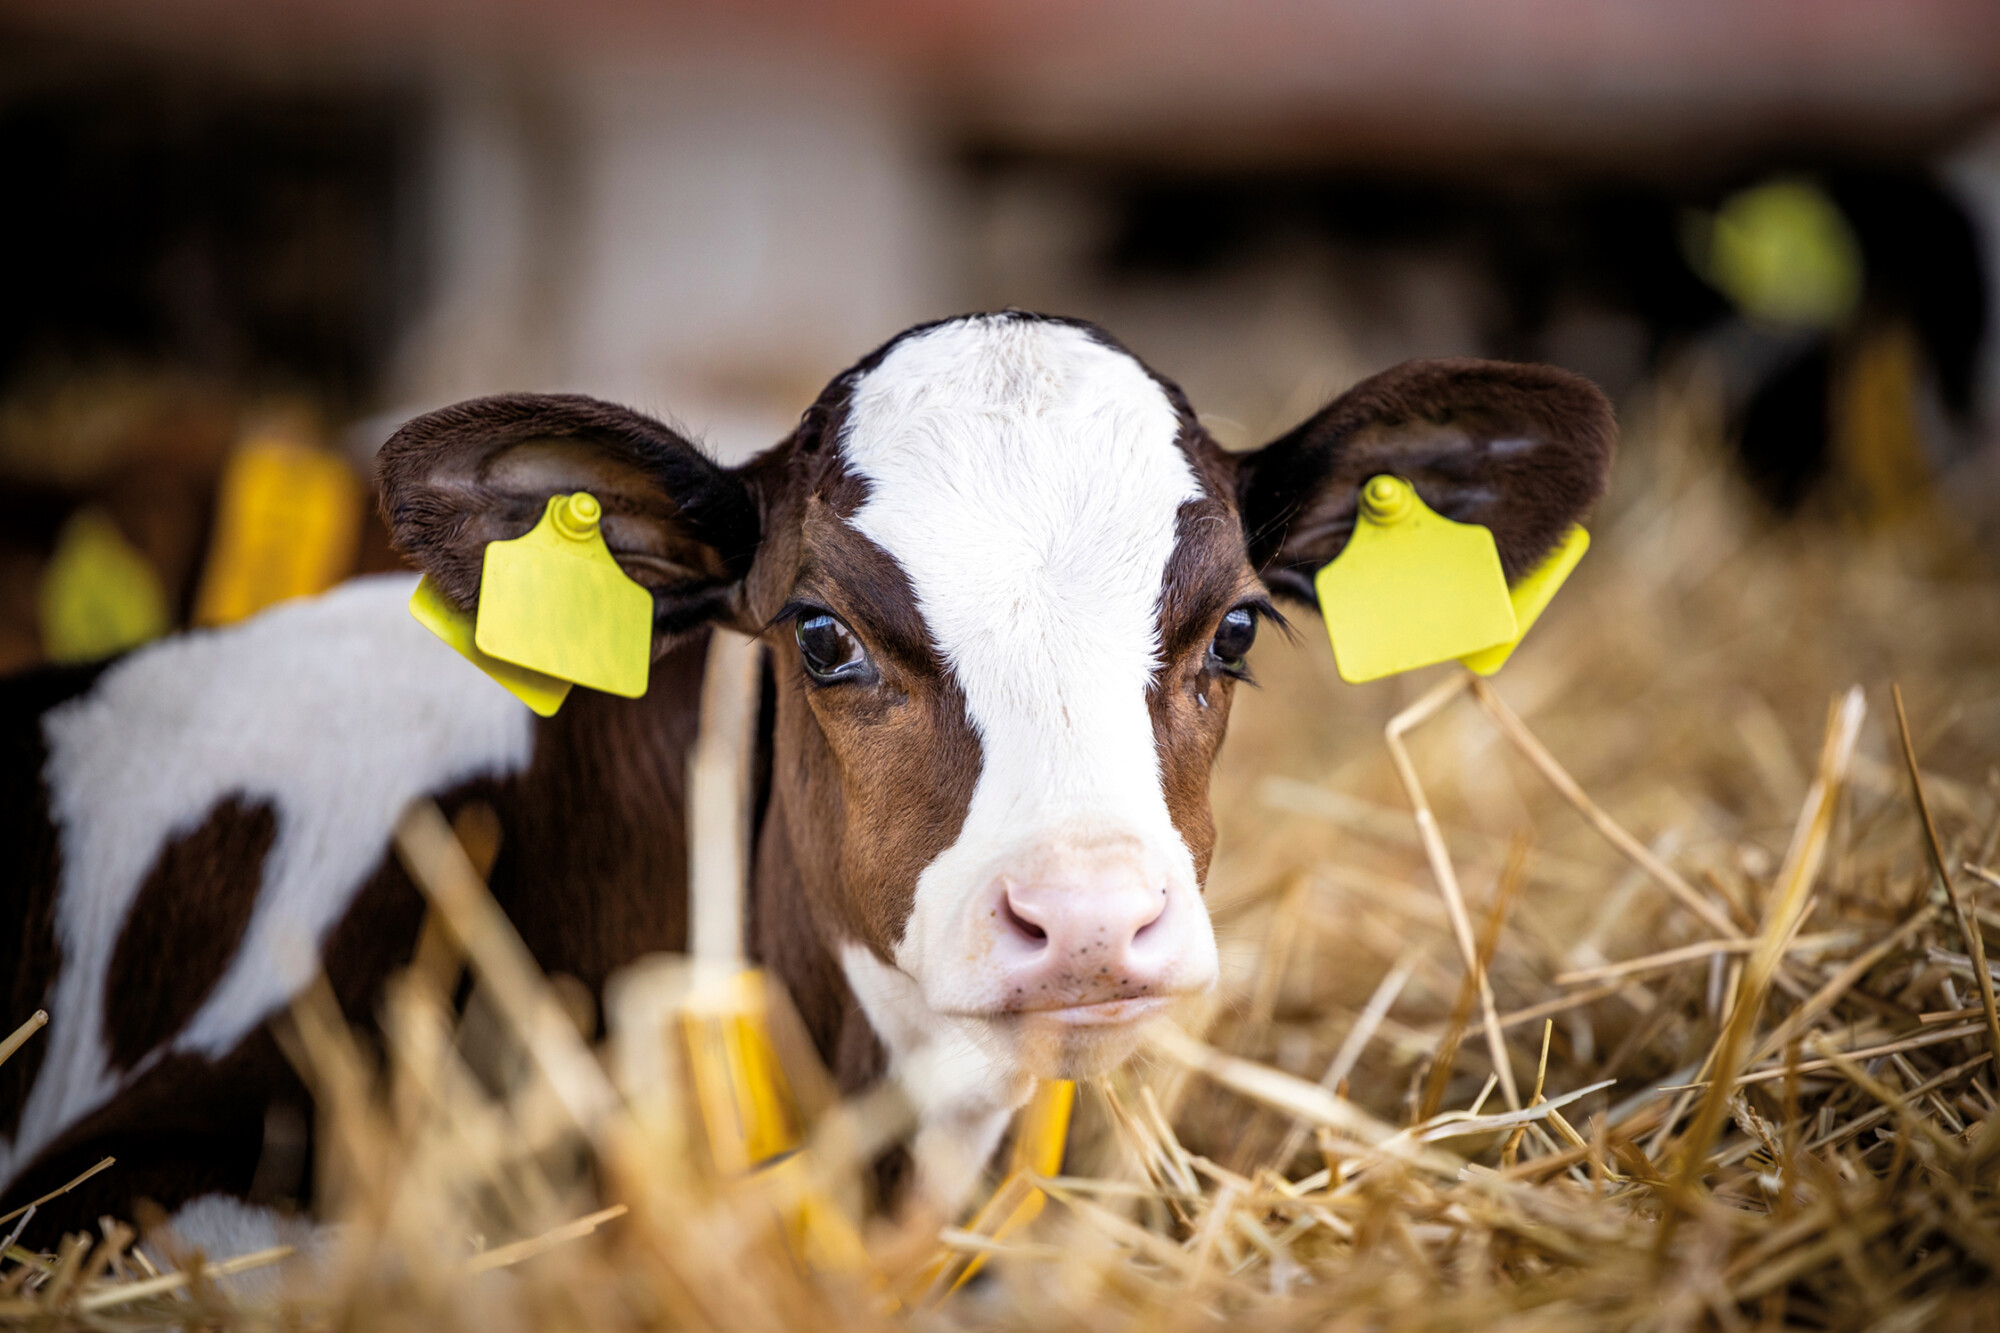 Spotted white and brown calf sitting in hay as part of calf housing grants story